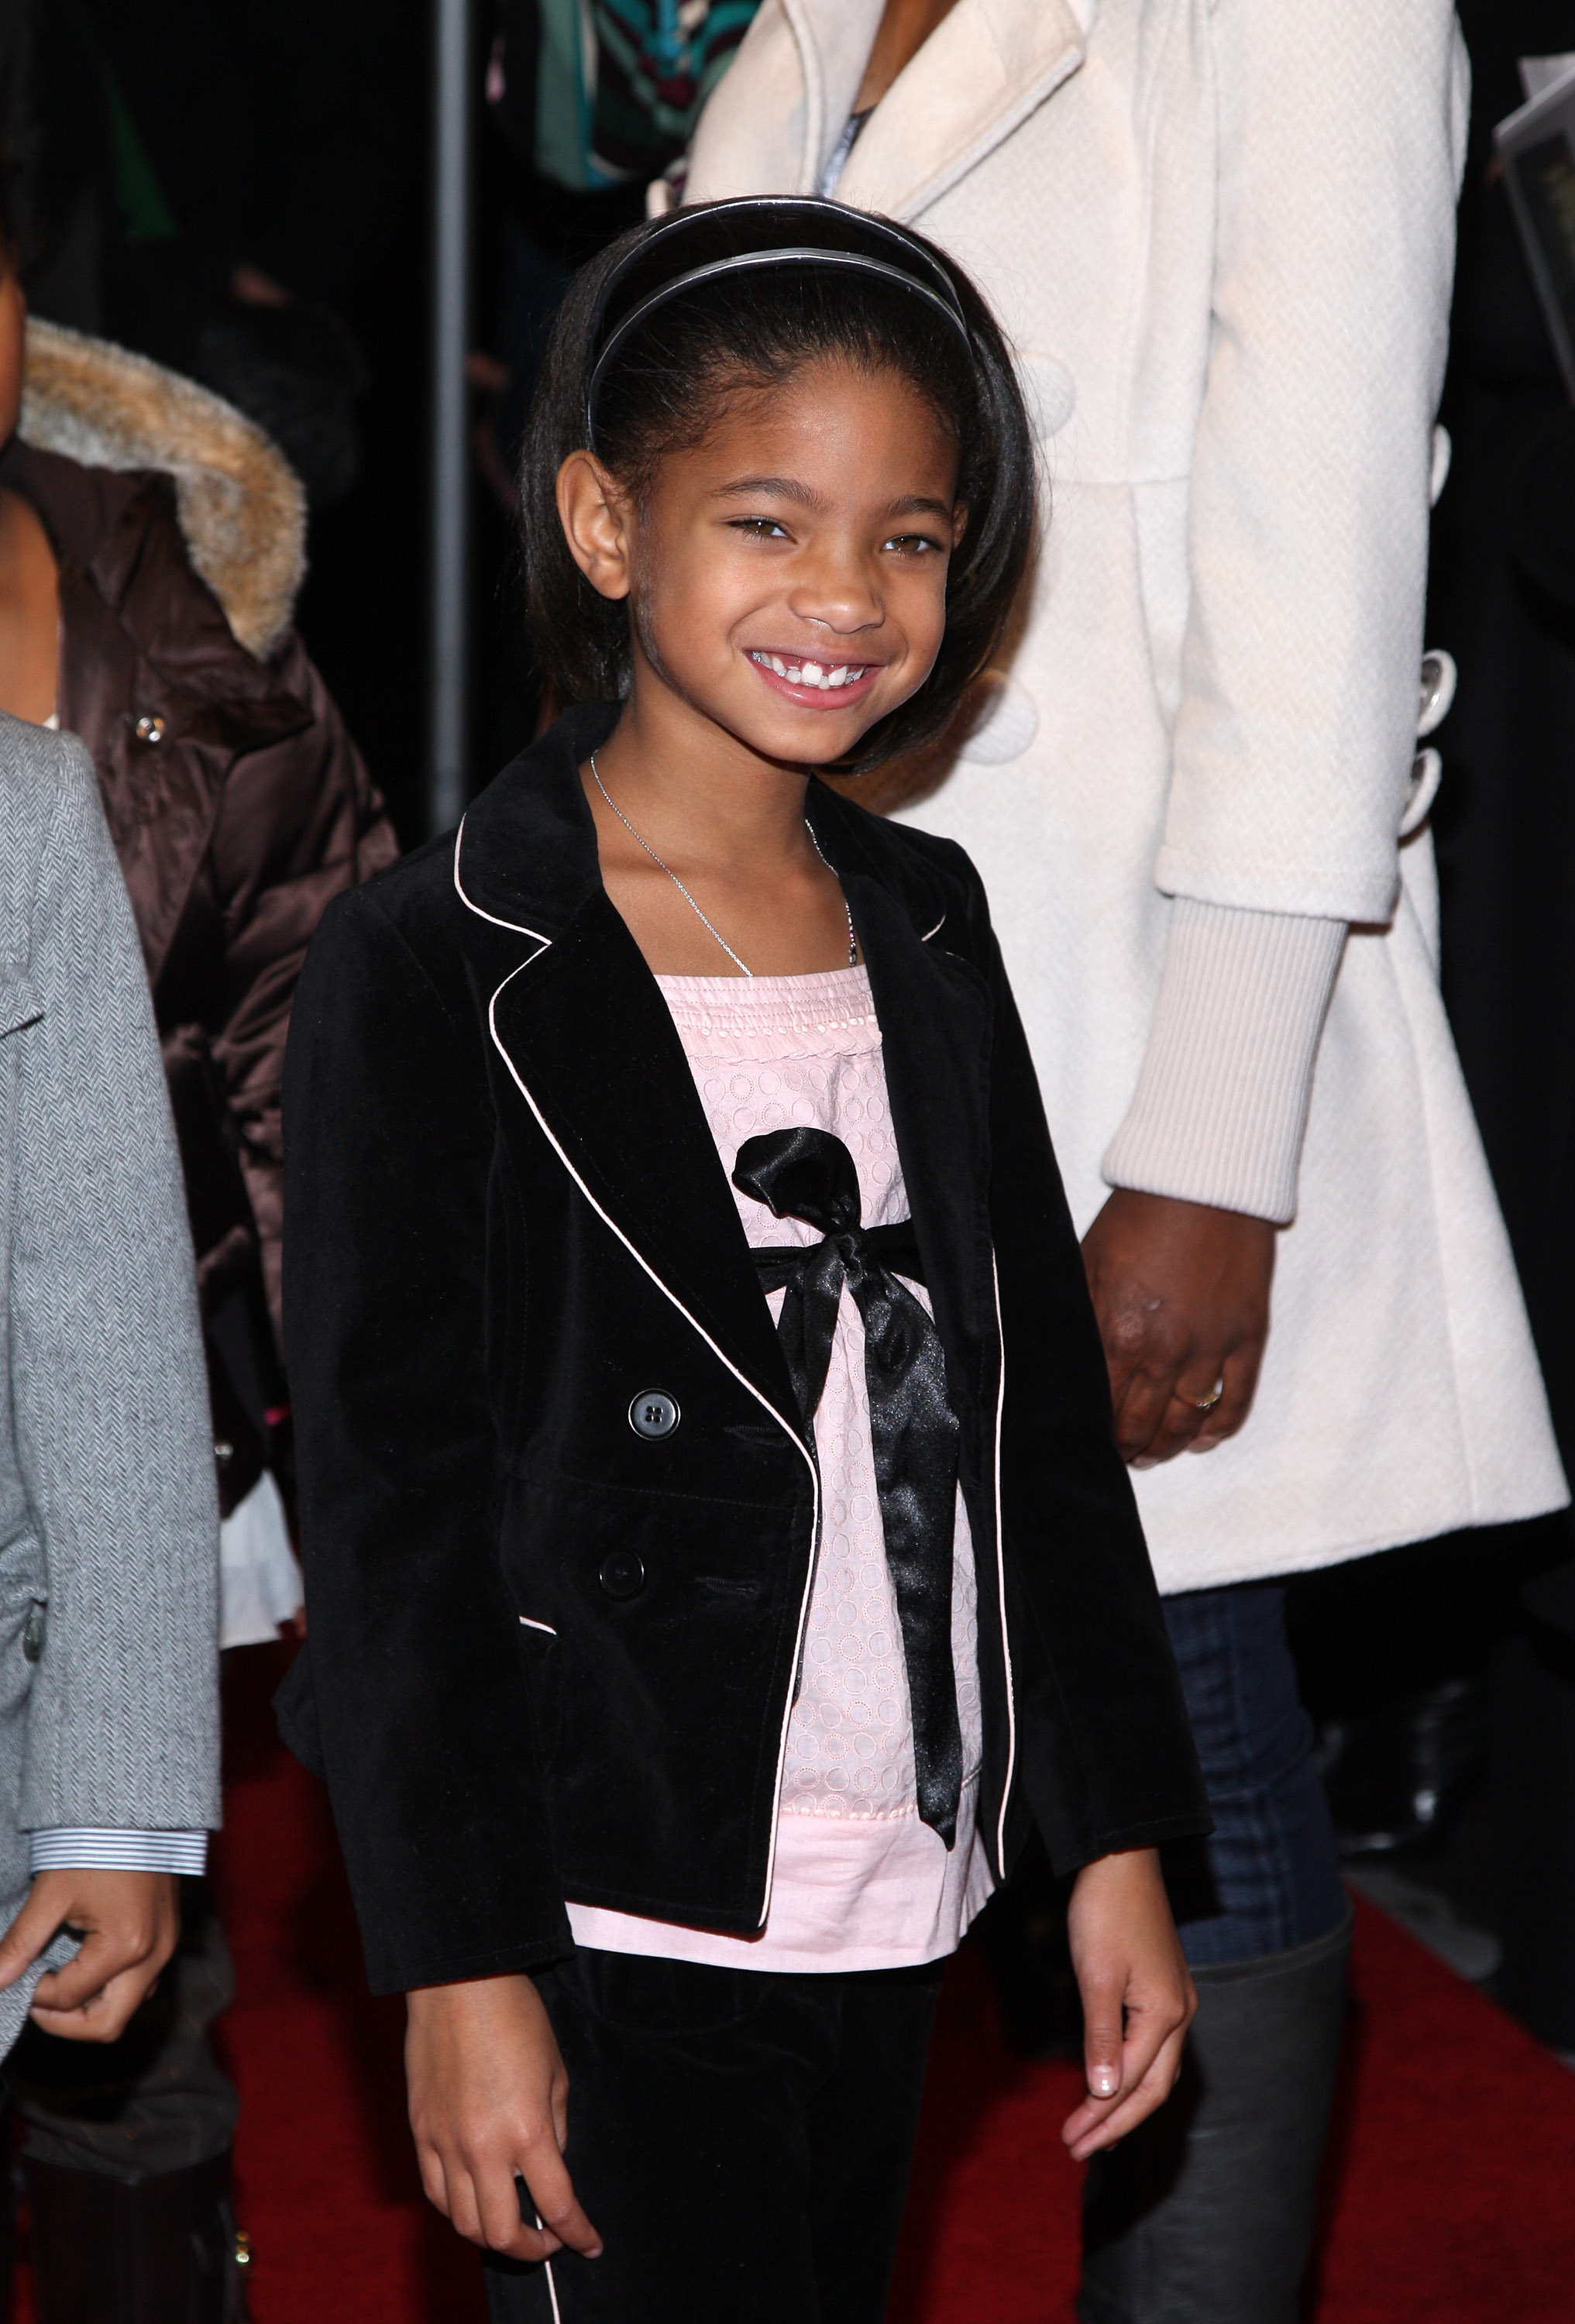 Willow Smith attends Warner Brothers New York premiere of 'I Am Legend'